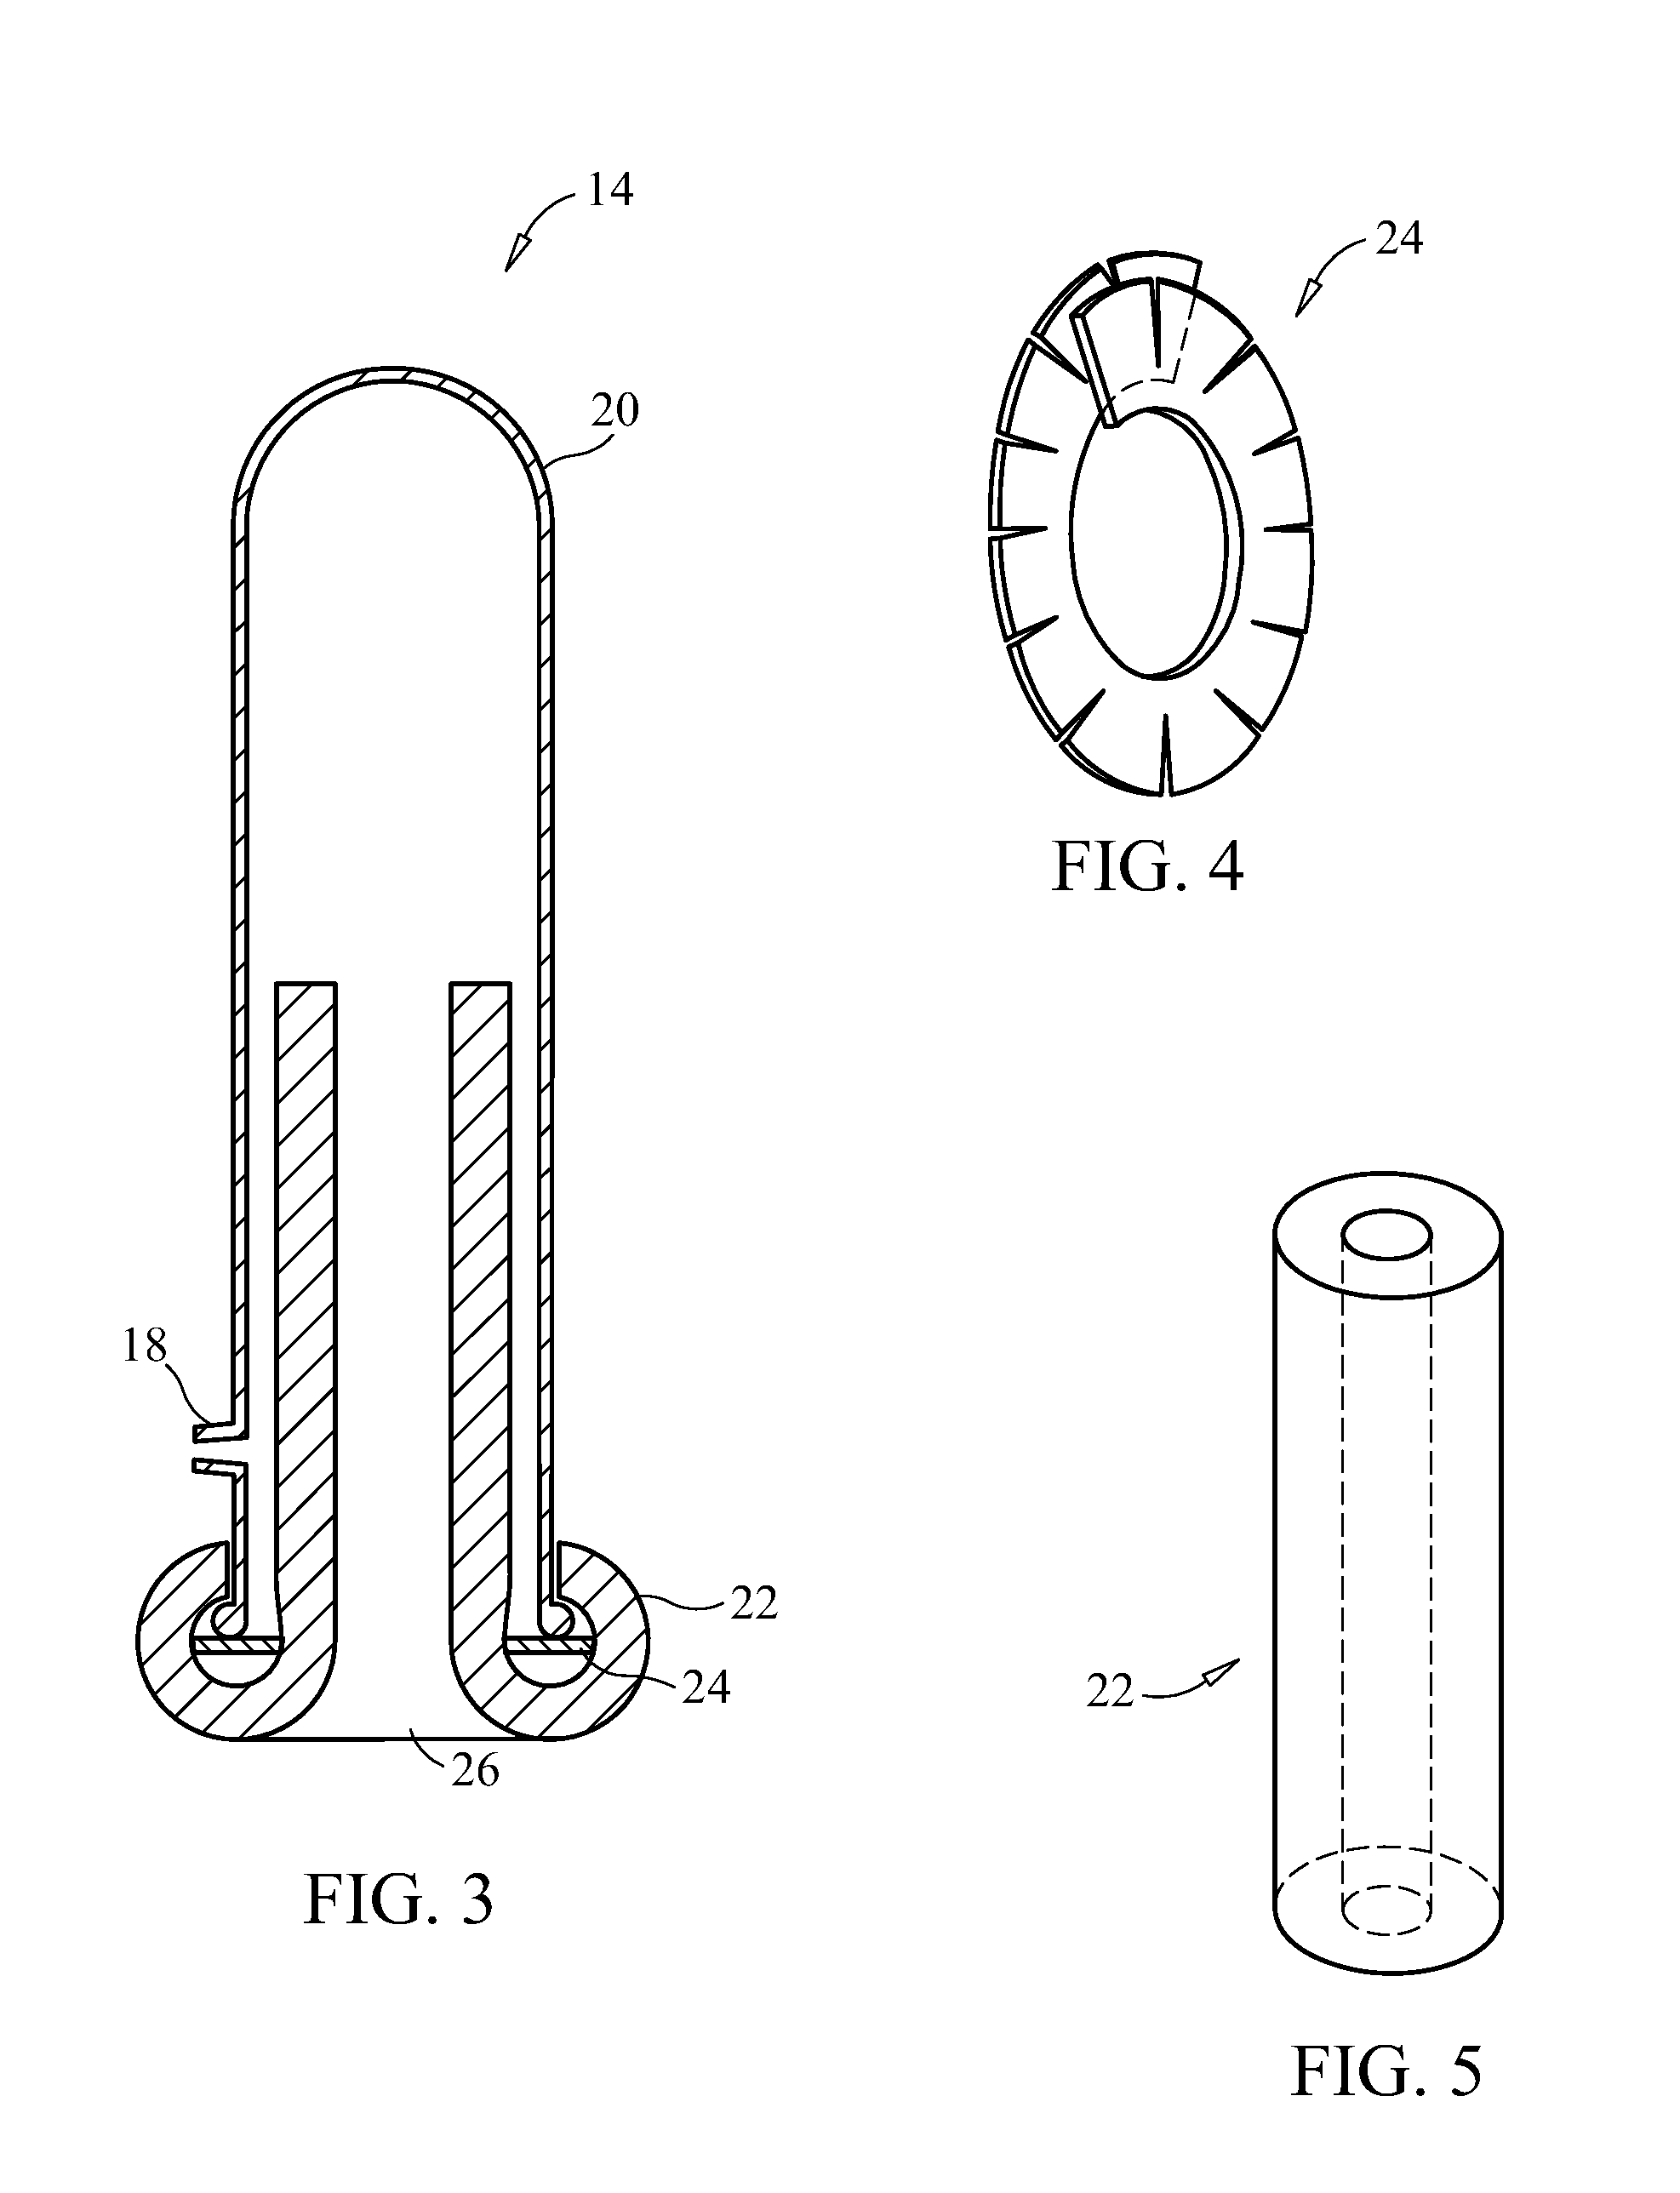 Apparatus and method for facilitating male orgasm